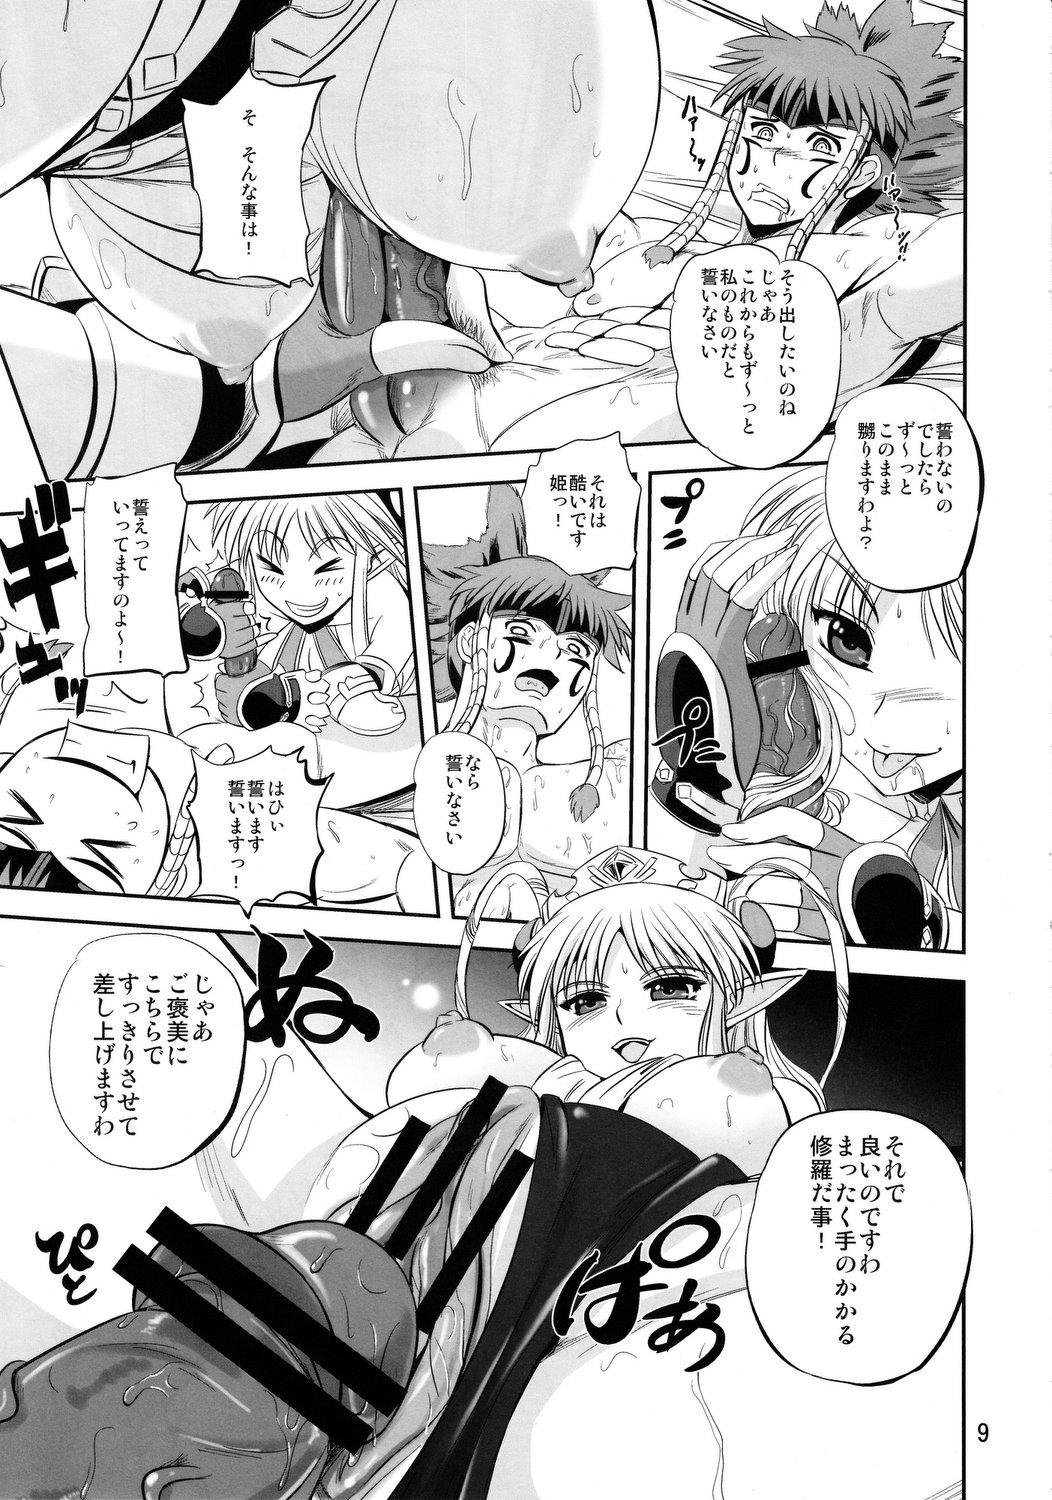 Sucking Dick Royal DoS Breaker - Super robot wars Endless frontier POV - Page 8